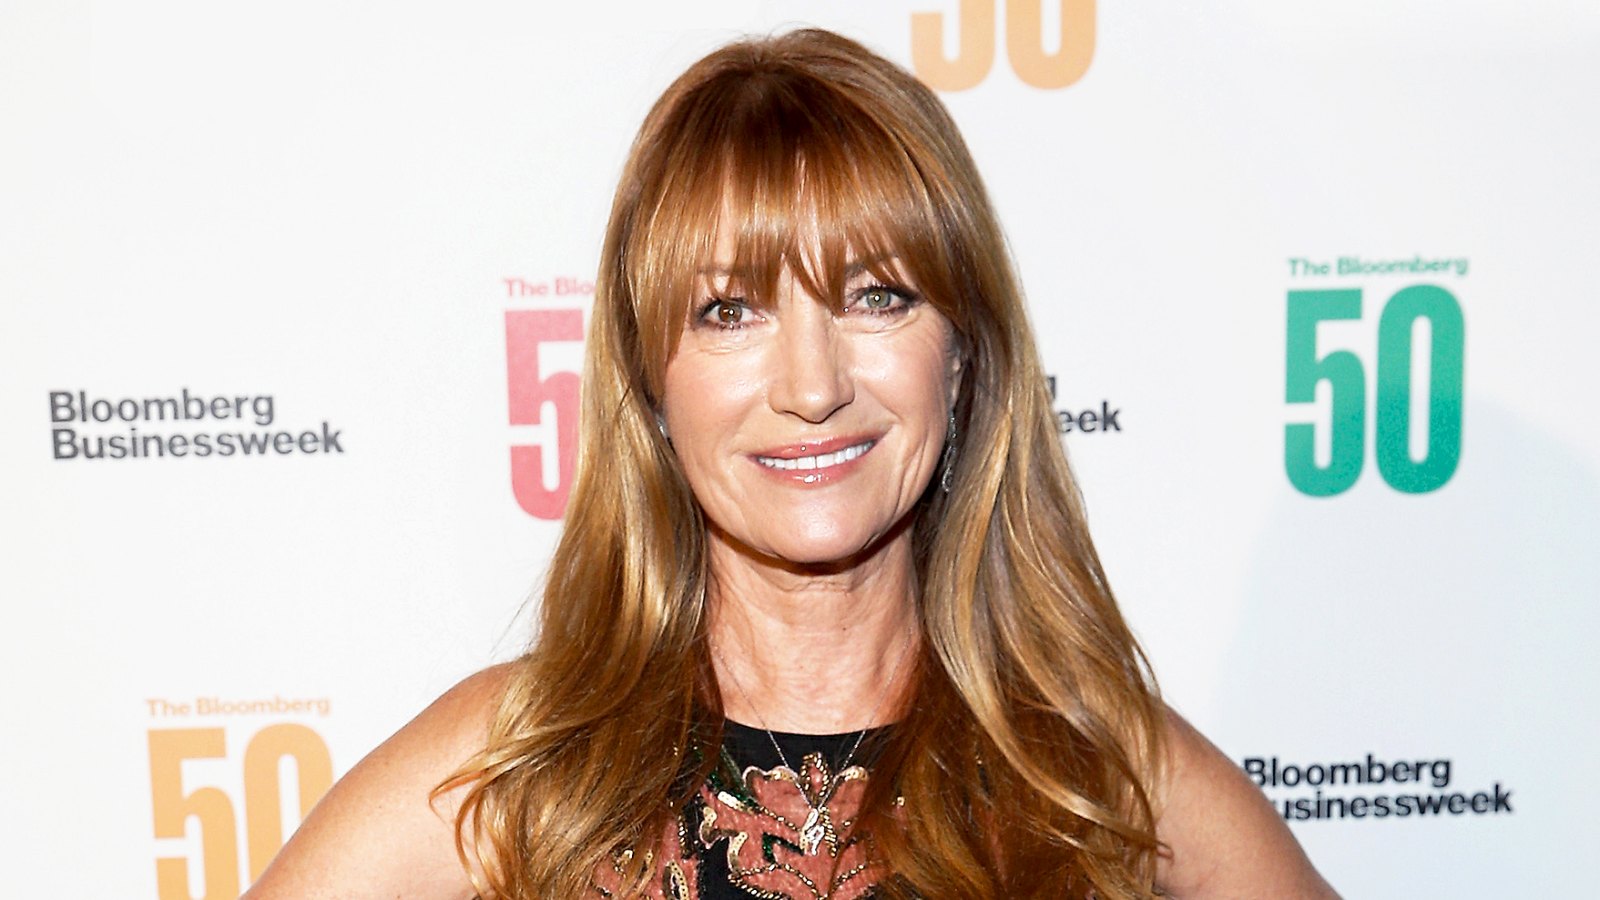 Jane Seymour attends "The Bloomberg 50" Celebration at Gotham Hall on December 4, 2017 in New York City.